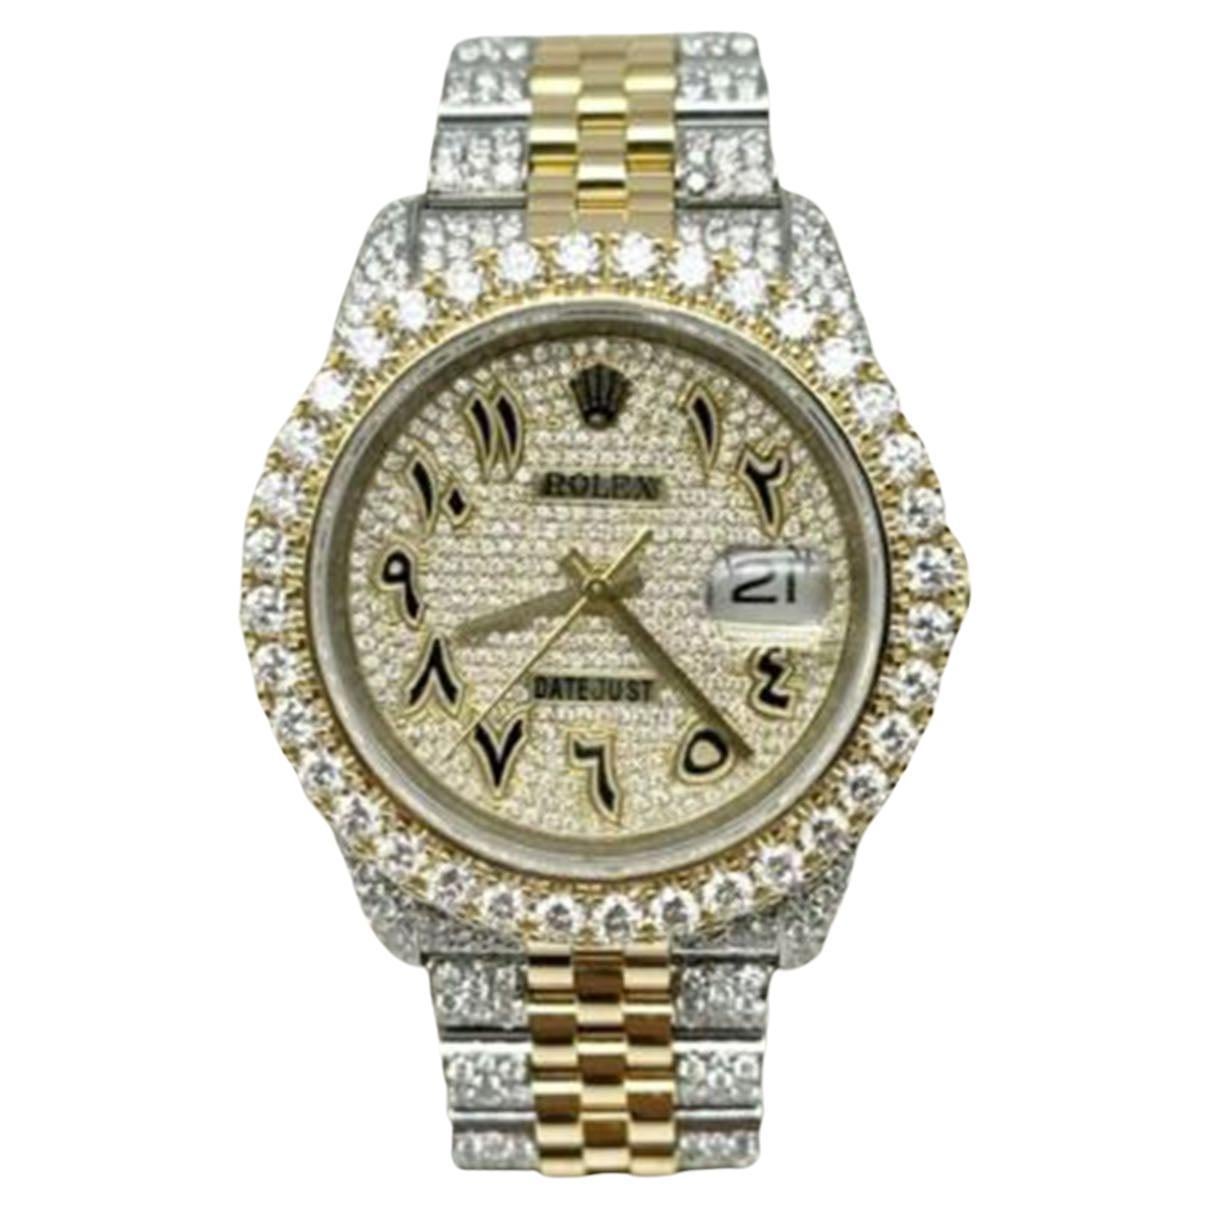 Style Number: 116233

 

Serial: F525***


Year: 2004

 

Model: Datejust

 

Case Material: Stainless Steel 

 

Band: 18K Yellow Gold & Stainless Steel with Custom Diamonds 

 

Bezel: 18K Yellow Gold Custom Diamond Band

 

Dial: Refinished Dial